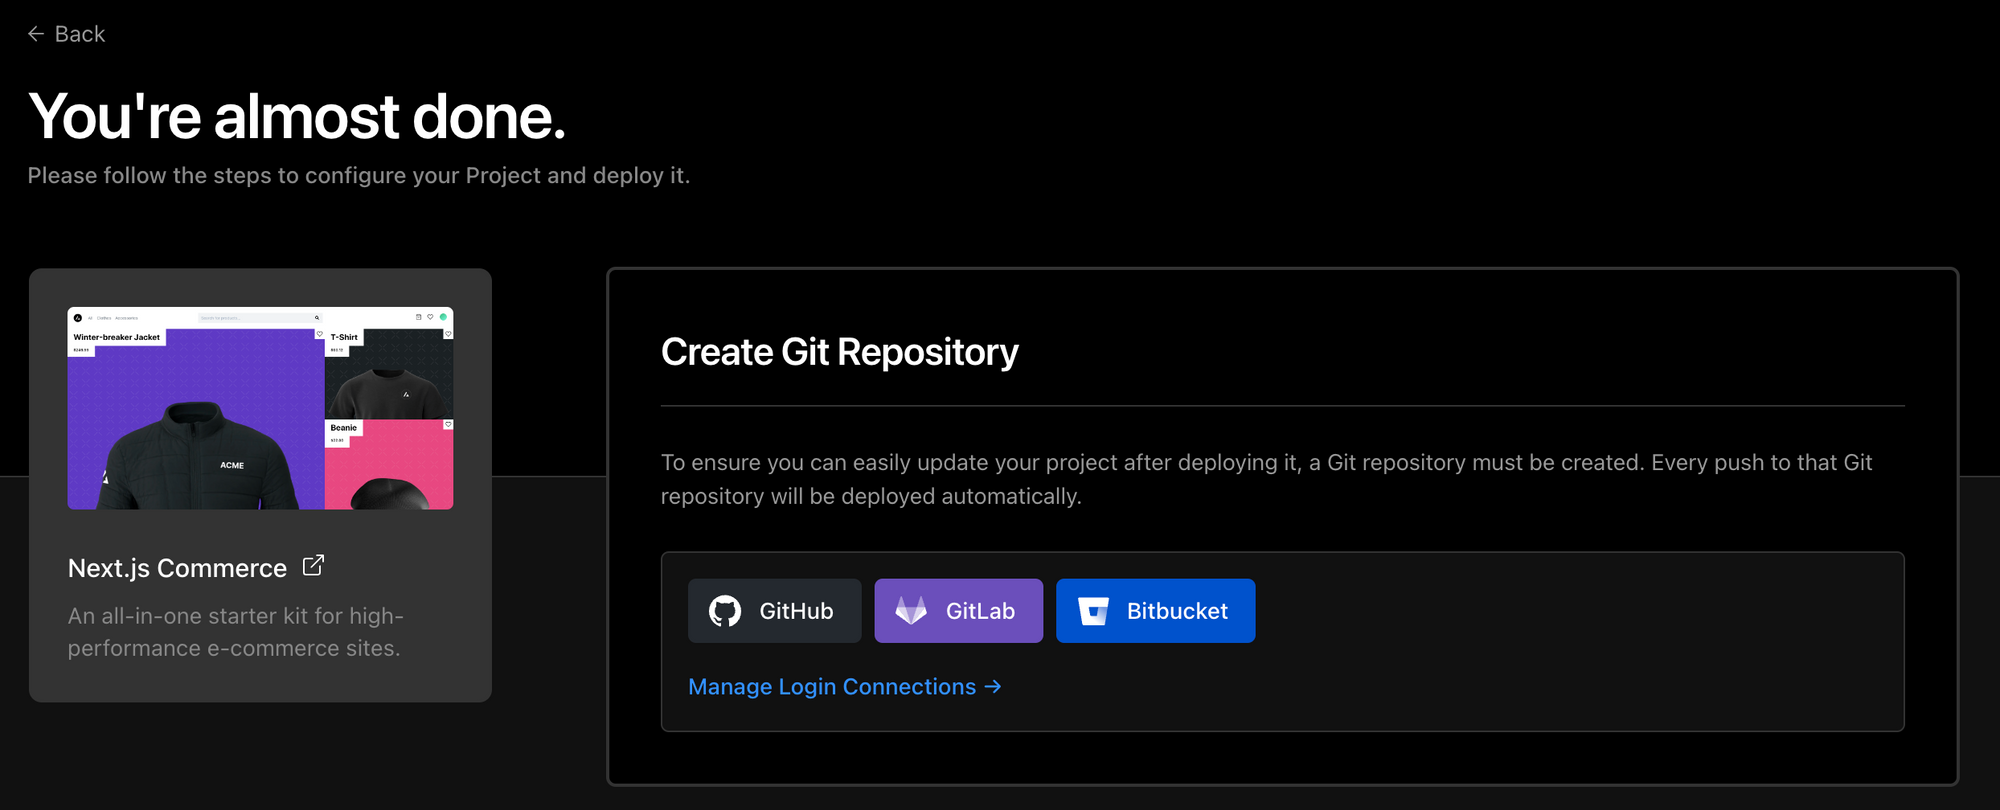 Image showing how the steps to create a new Git repository in vercel